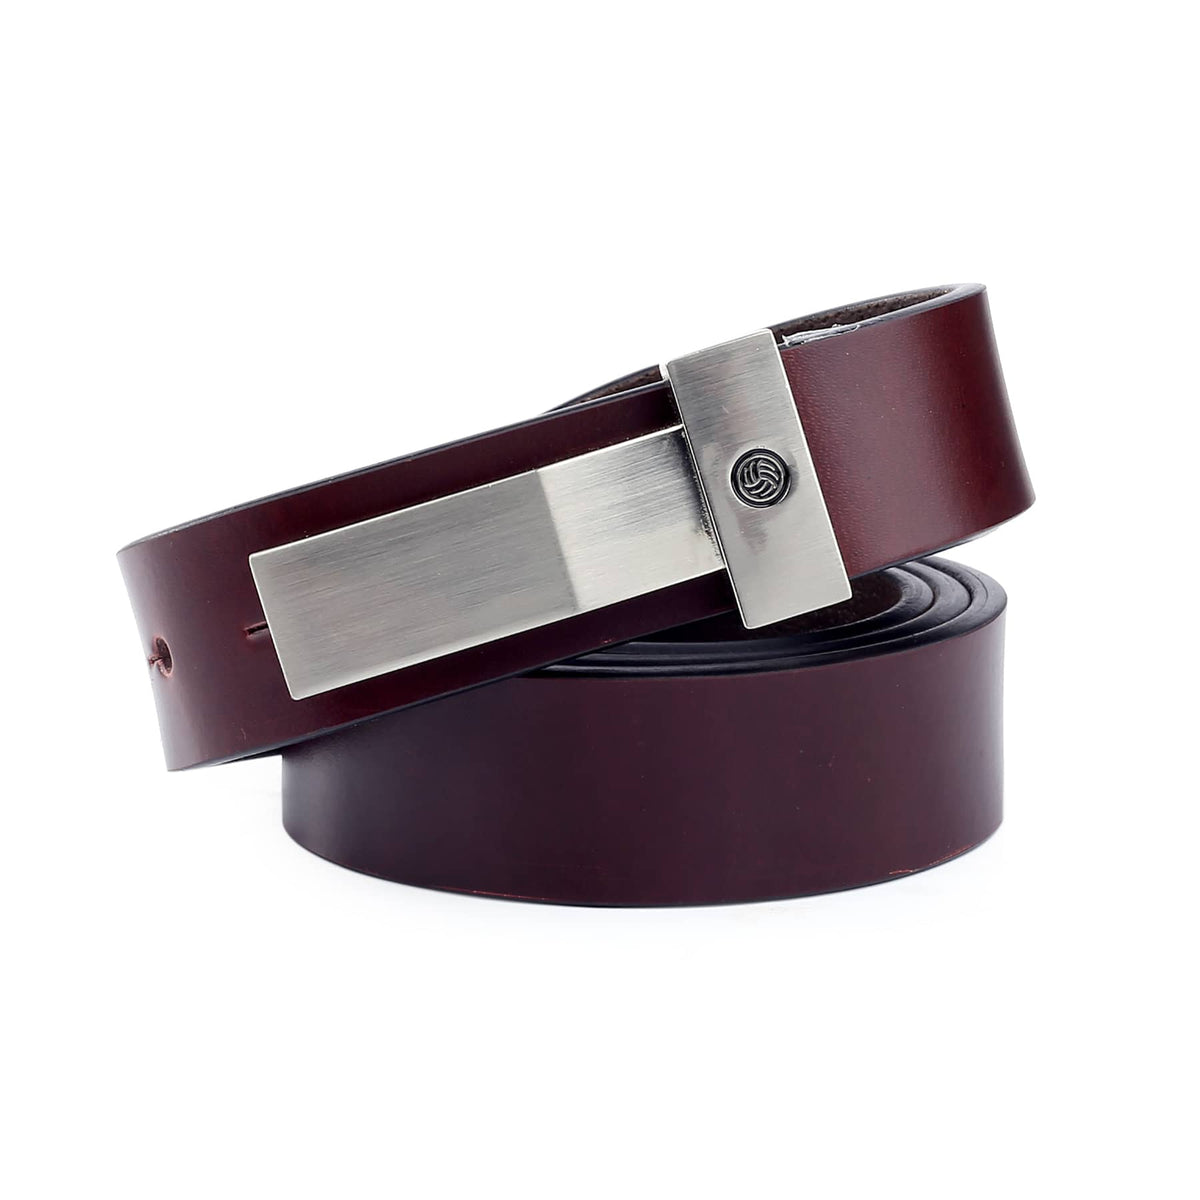 Bacca Bucci Genuine Leather Formal Dress Belts with a Stylish Finish & a Nickel-Free Buckle